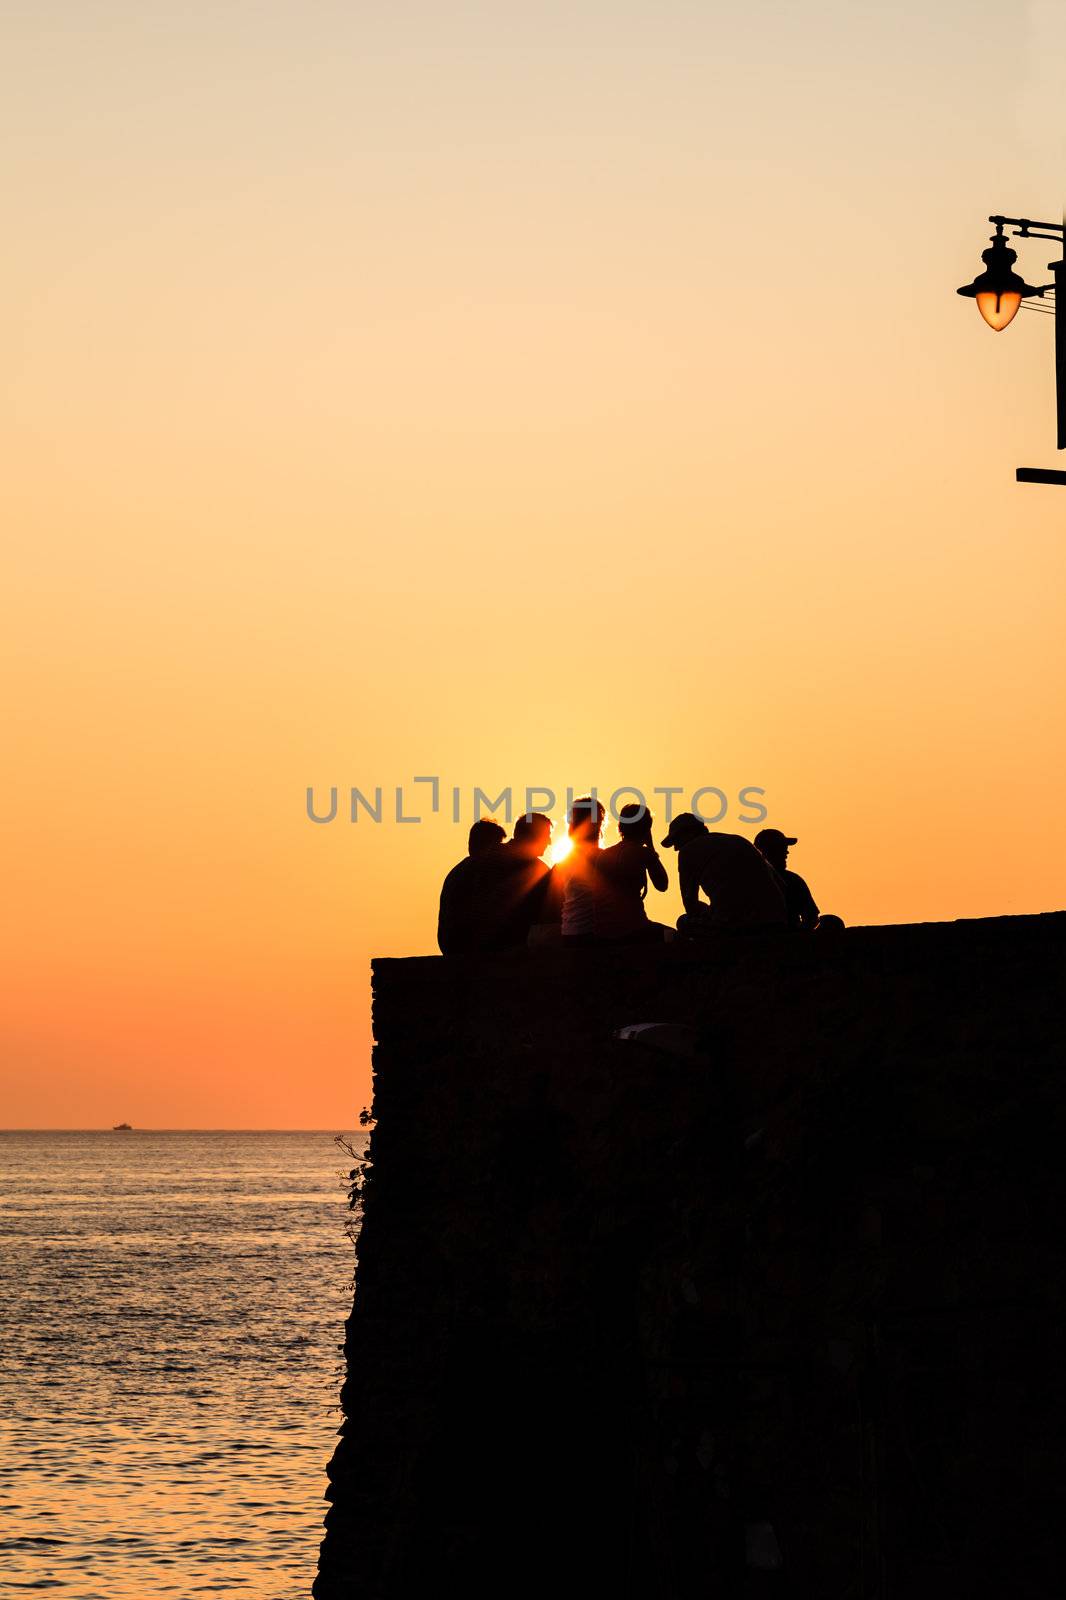 Group of People Watching Sunset in Riomaggiore, Italy